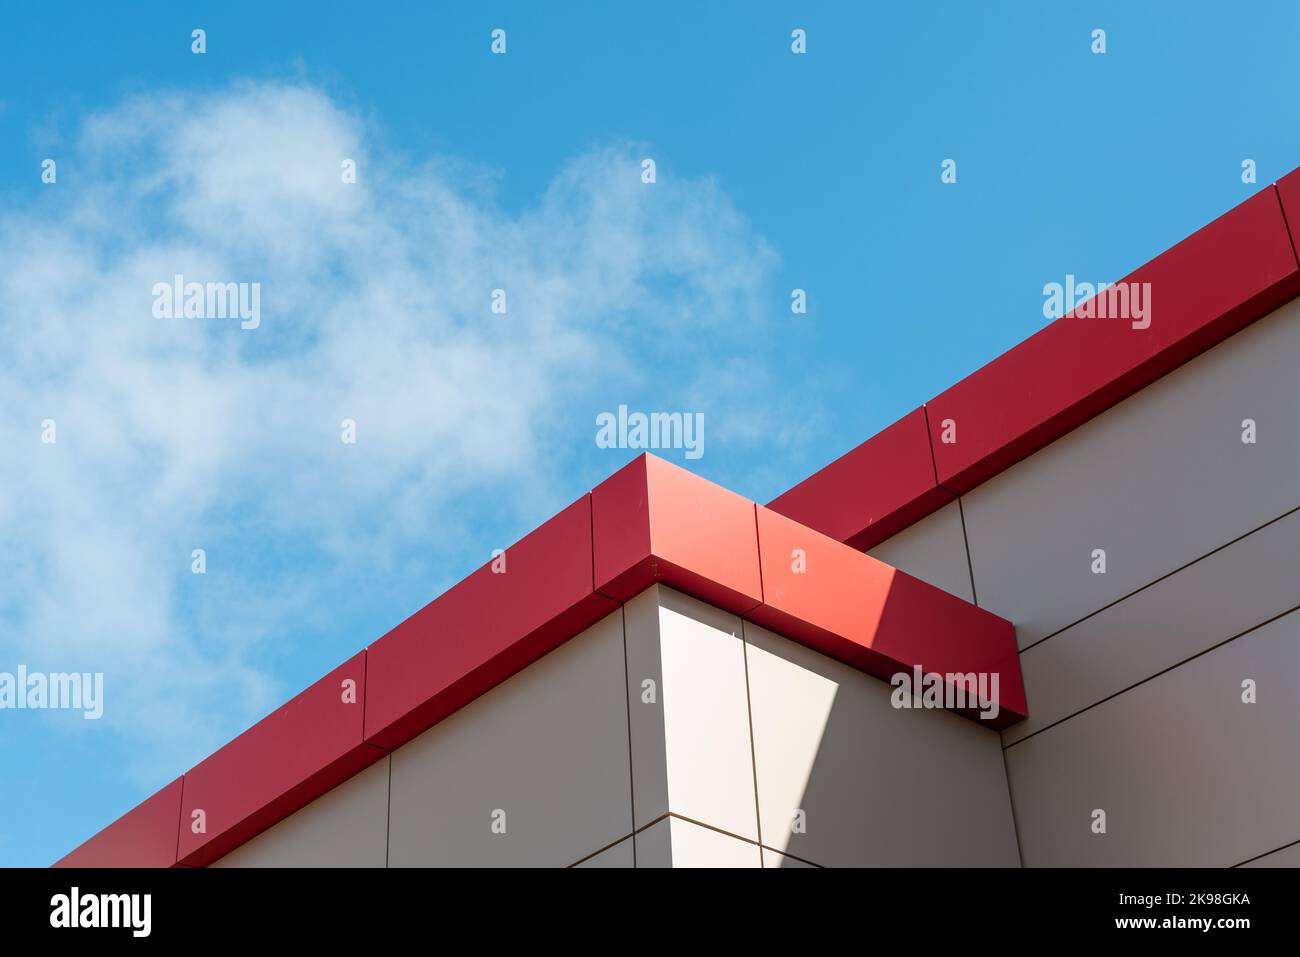 The exterior wall of a contemporary commercial style building with aluminum metal composite panels and glass windows. The futuristic building has engi Stock Photo